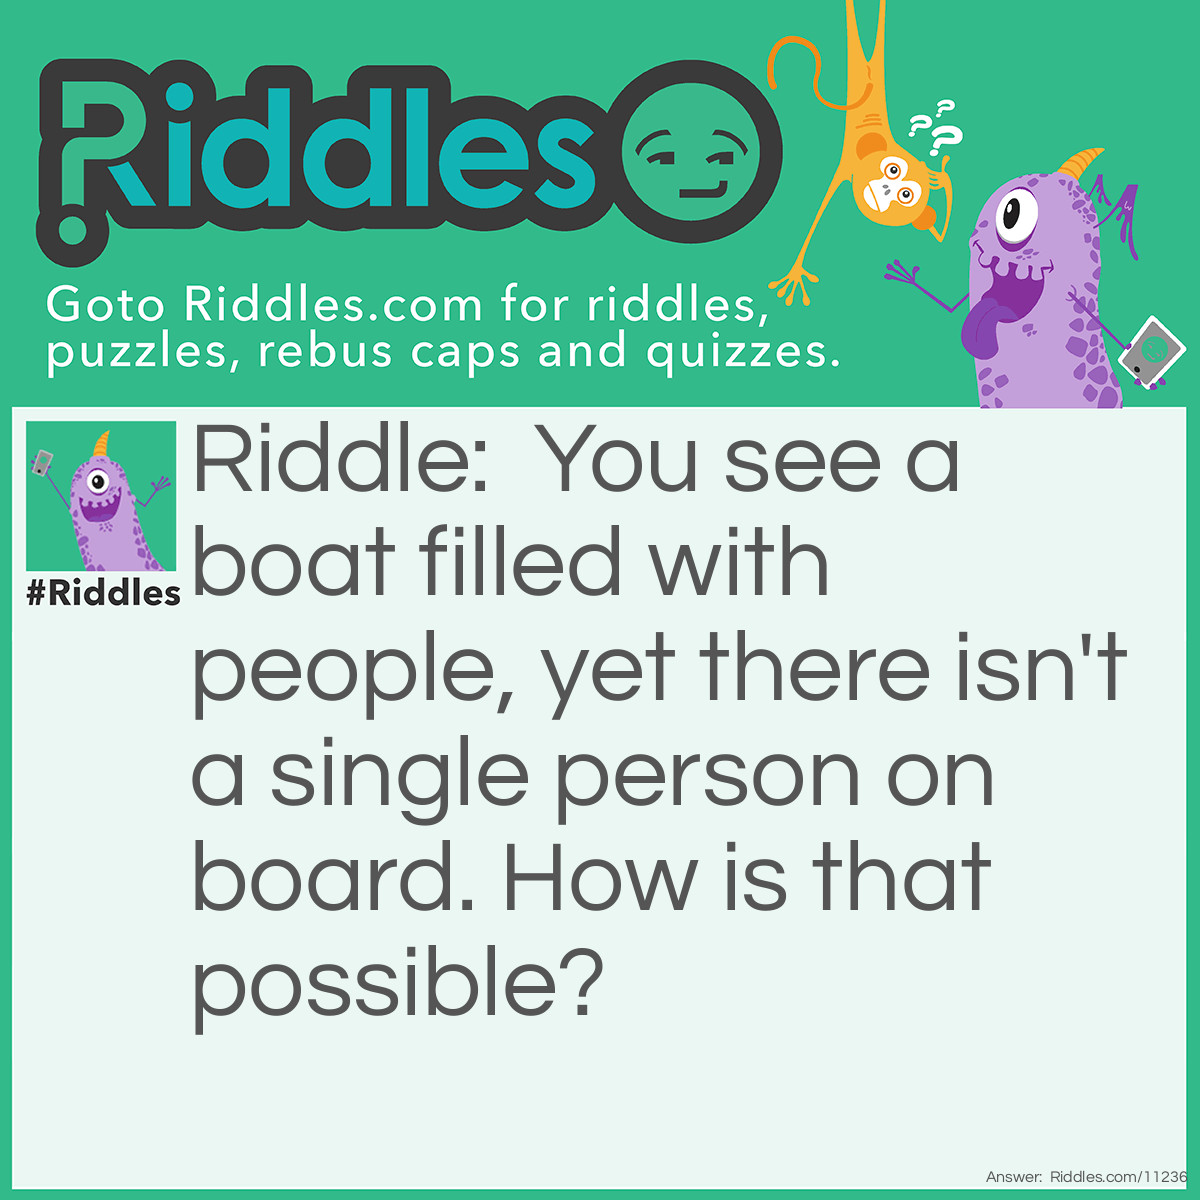 Riddle: You see a boat filled with people, yet there isn't a single person on board. How is that possible? Answer: All the people on the boat are married.